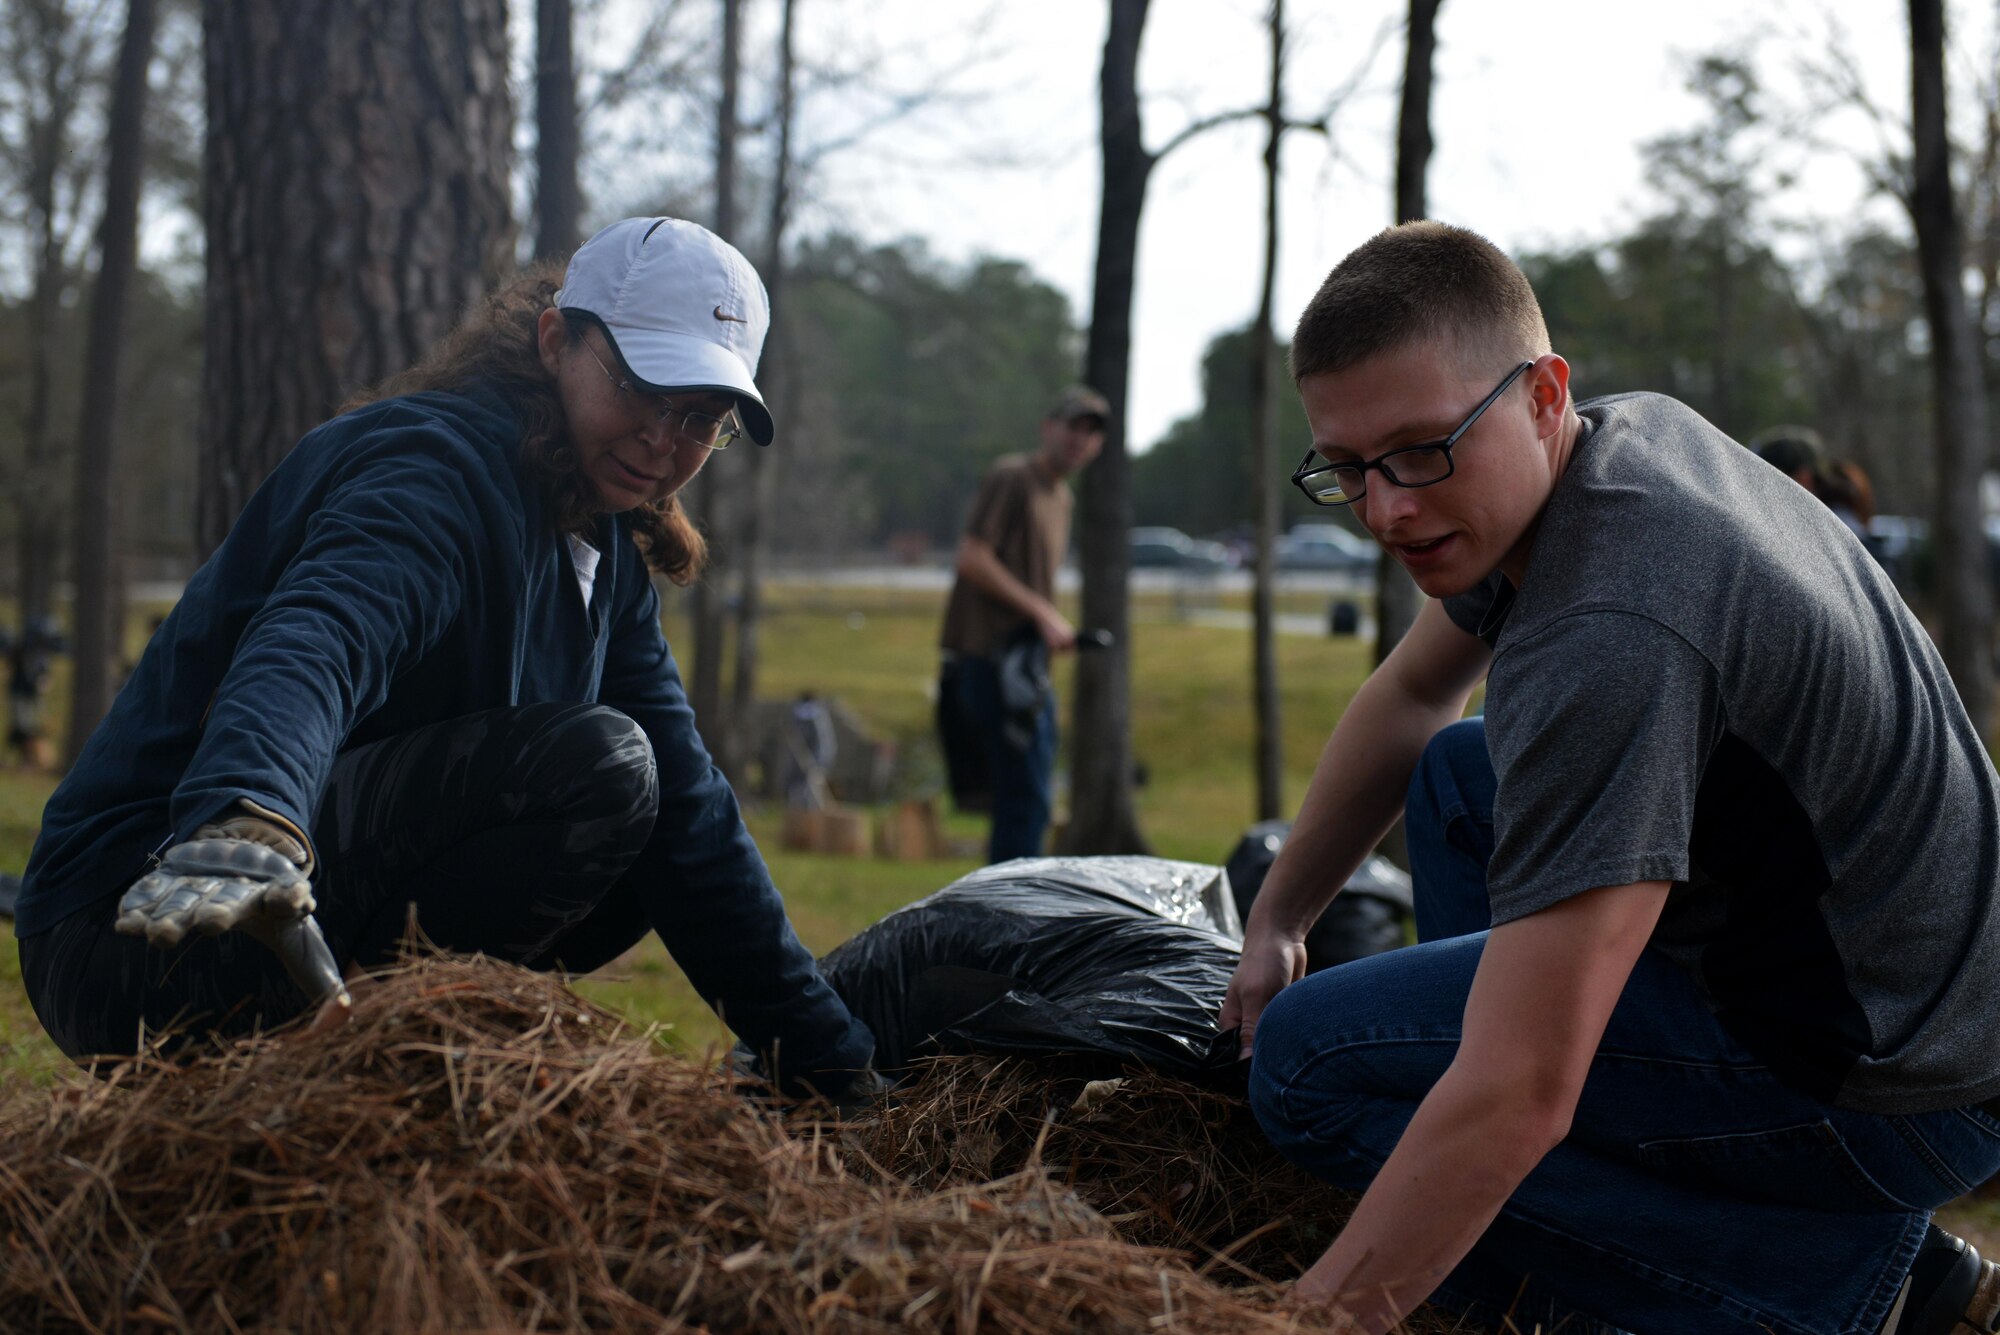 U.S. Air Force Senior Master Sgt. Christina Tinsley, 20th Force Support Squadron (FSS) superintendent, left, and 2nd Lt. Steven Prentice, 20th FSS food services officer, right, scoop debris into a bag during the ninth annual Beautify Wateree event at Wateree Recreation Area near Camden, S.C., March 25, 2017. In around three hours, volunteers removed approximately 2,500 pounds of debris from the area, allowing Wateree staff to focus on taking care of the cabins. (U.S. Air Force photo by Airman 1st Class Destinee Sweeney)